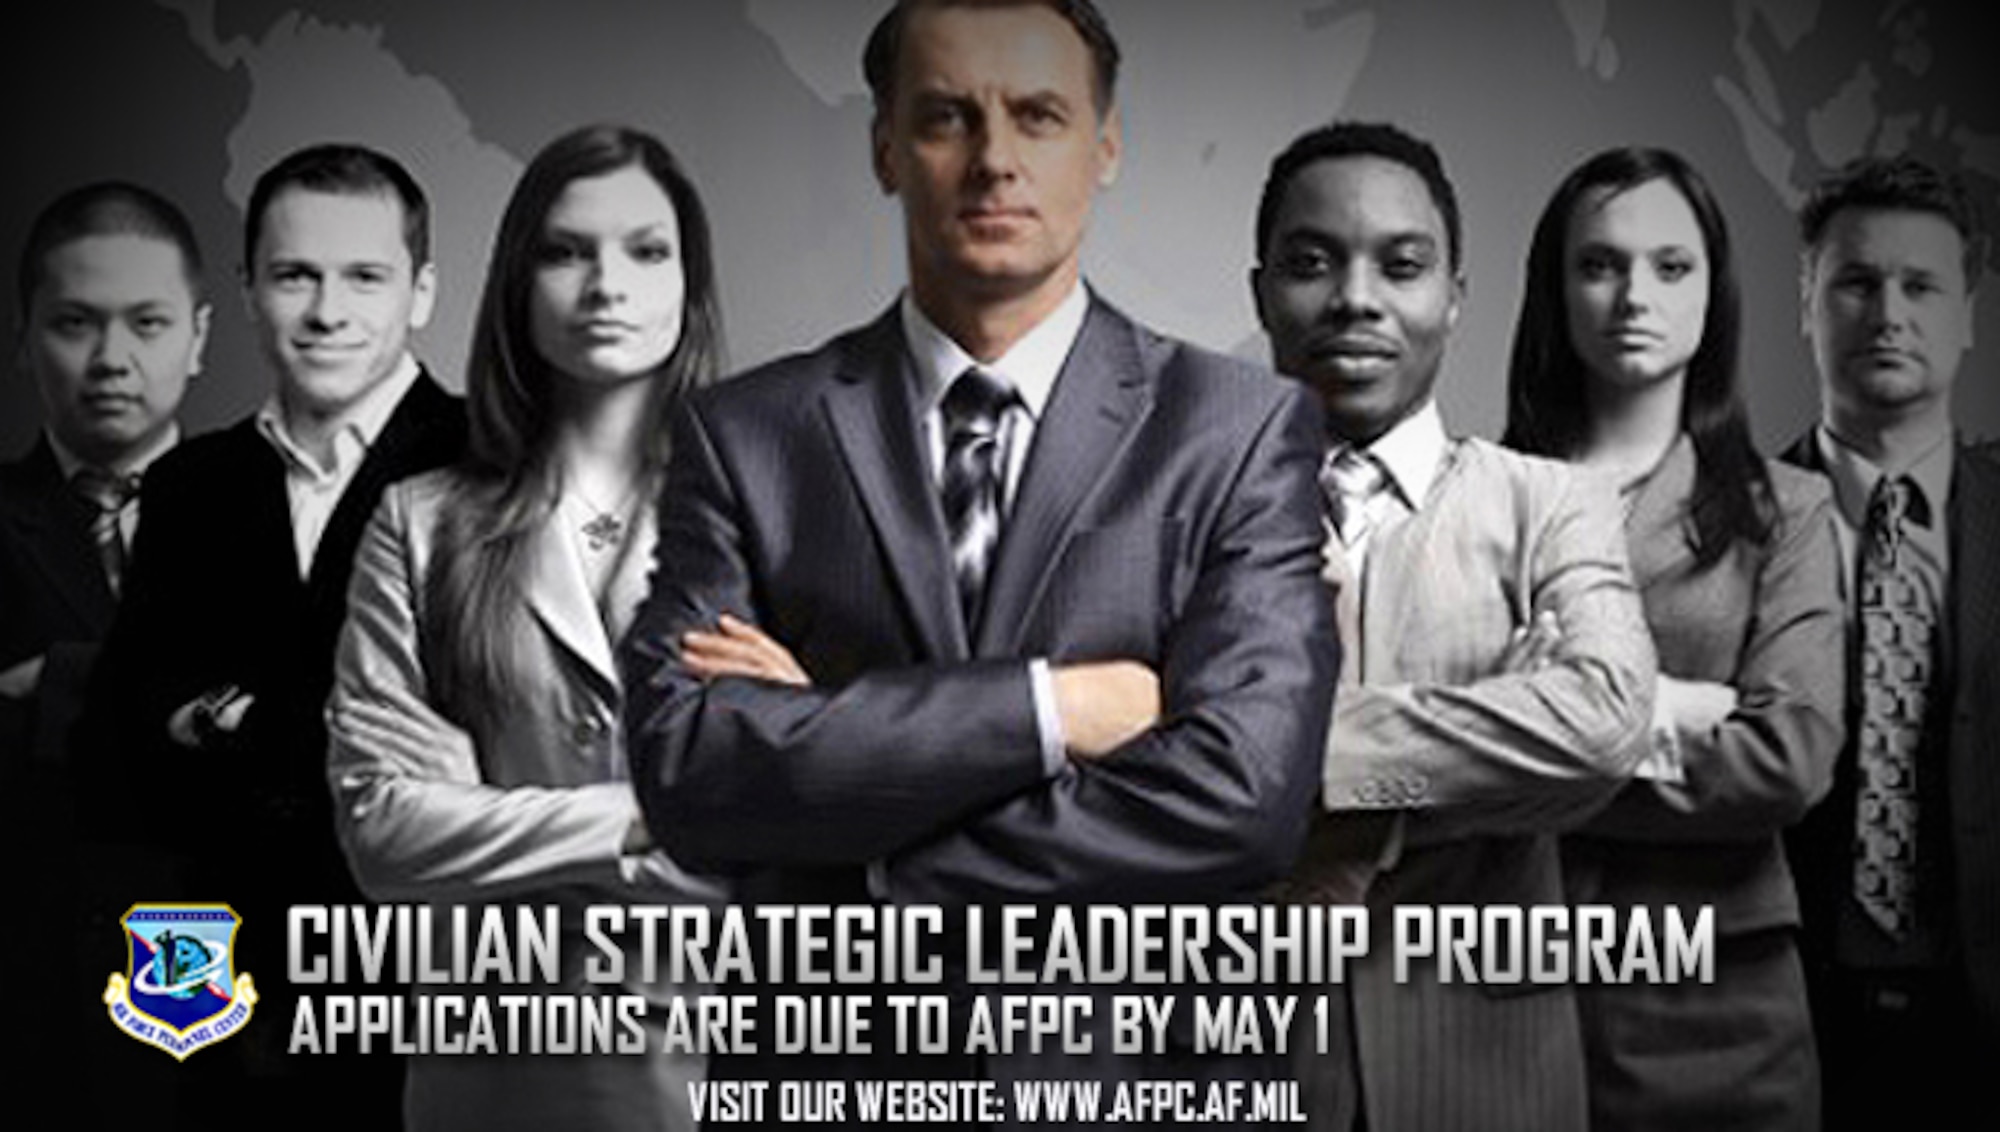 The Civilian Strategic Leadership Program is accepting nominations through May 1. CSLP is the Air Force’s senior civilian career broadening program that is designed to develop multiskilled GS-13, GS-14 and GS-15 leaders. 